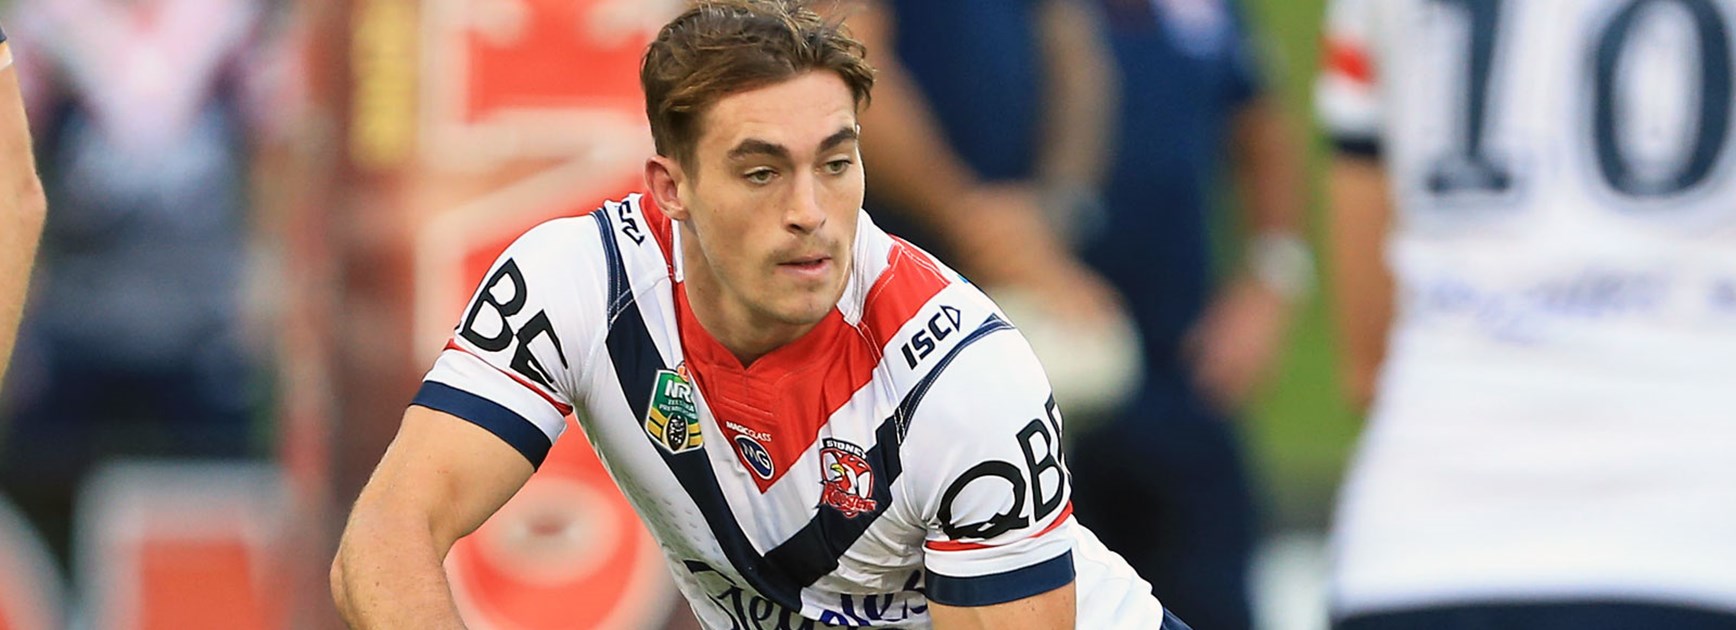 Roosters utility Connor Watson stepped up in the absence of co-captain Jake Friend in Round 4.